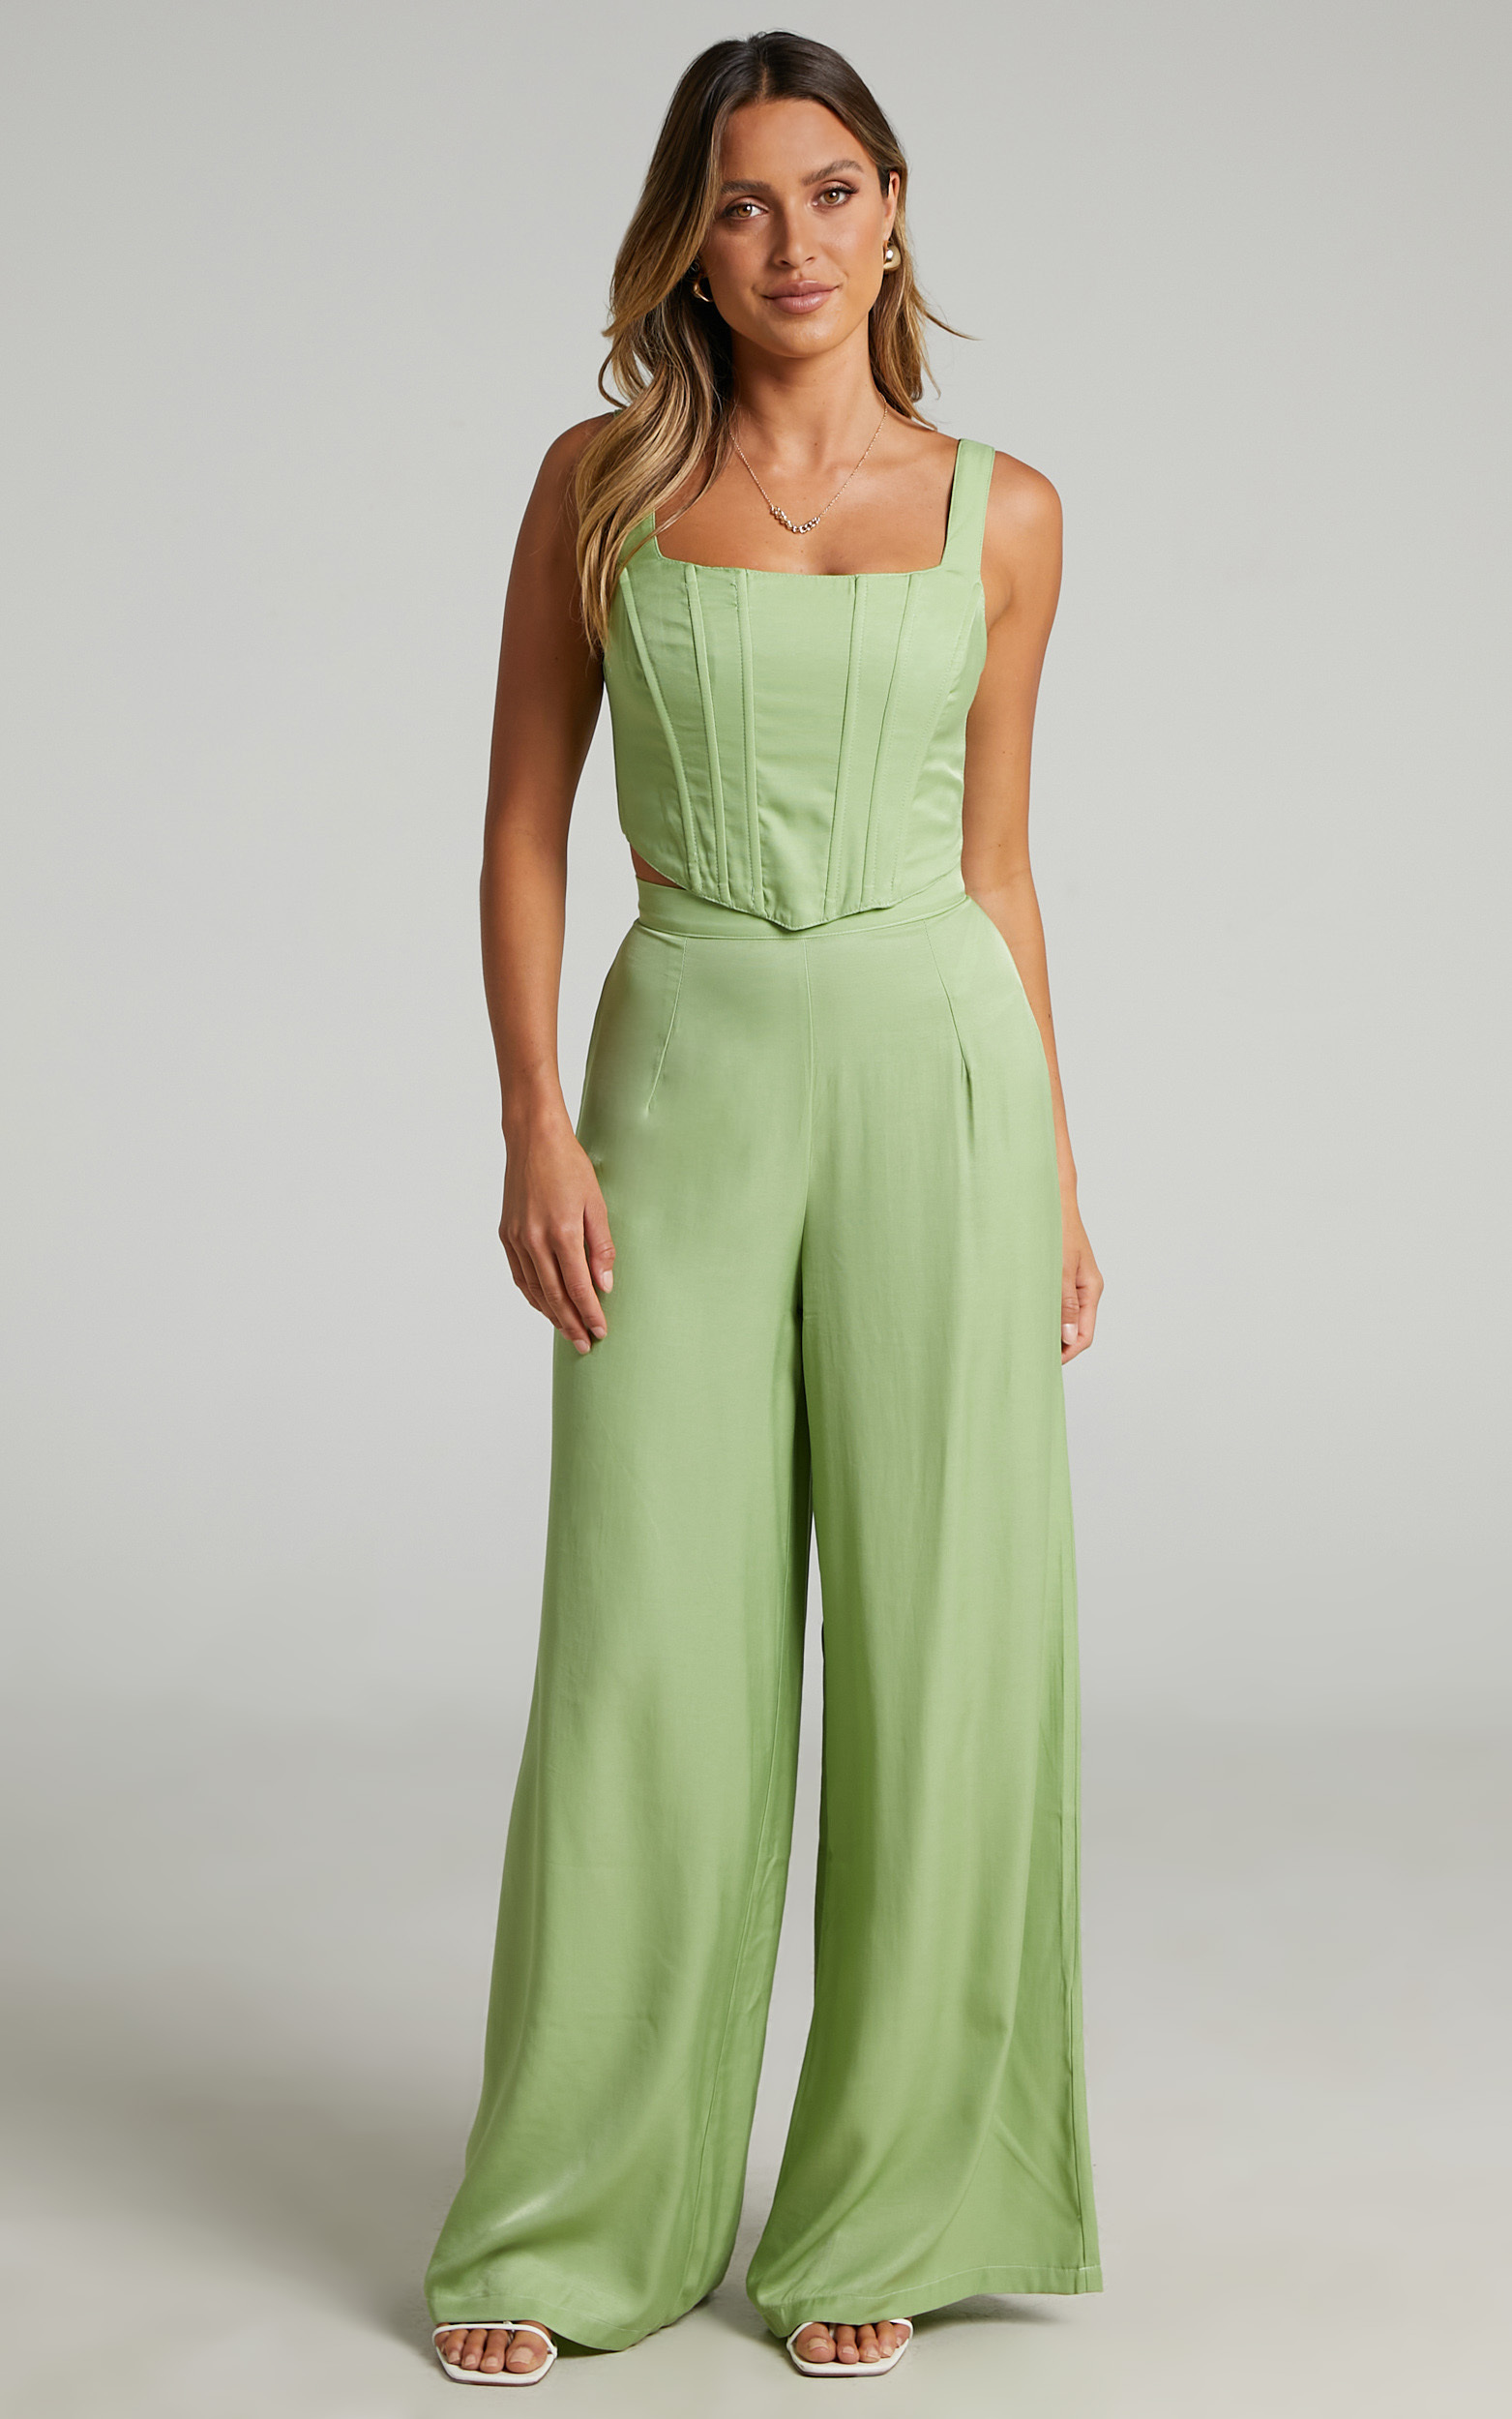 Seven Wonders - Seville Pant in Avocado - XS, GRN1, hi-res image number null